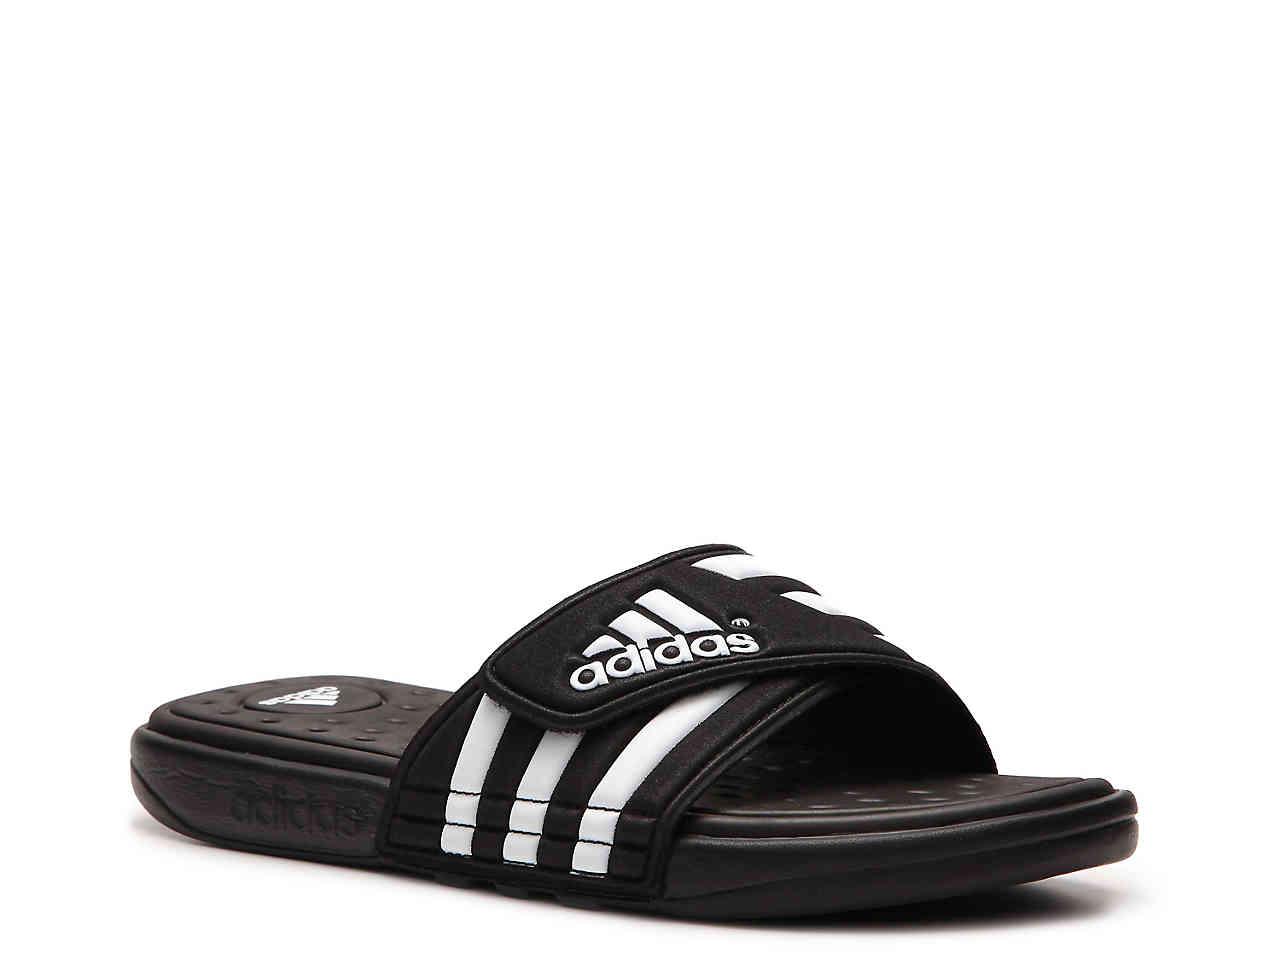 adidas Synthetic Supercloud Slide Sandal in Black for Men - Lyst